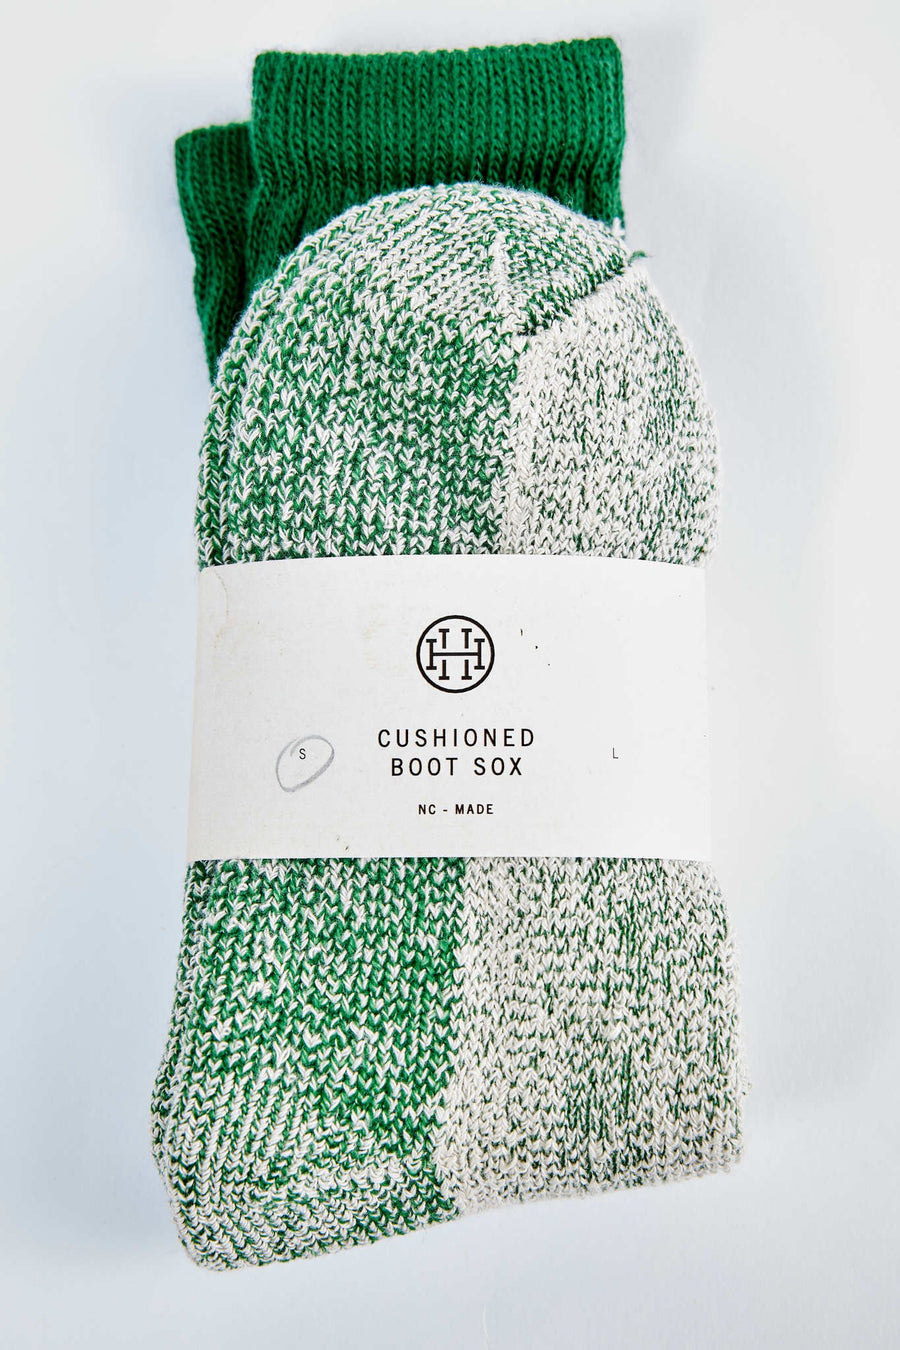 HH Classic Boot Sox for General Use - Green - Hudson’s Hill